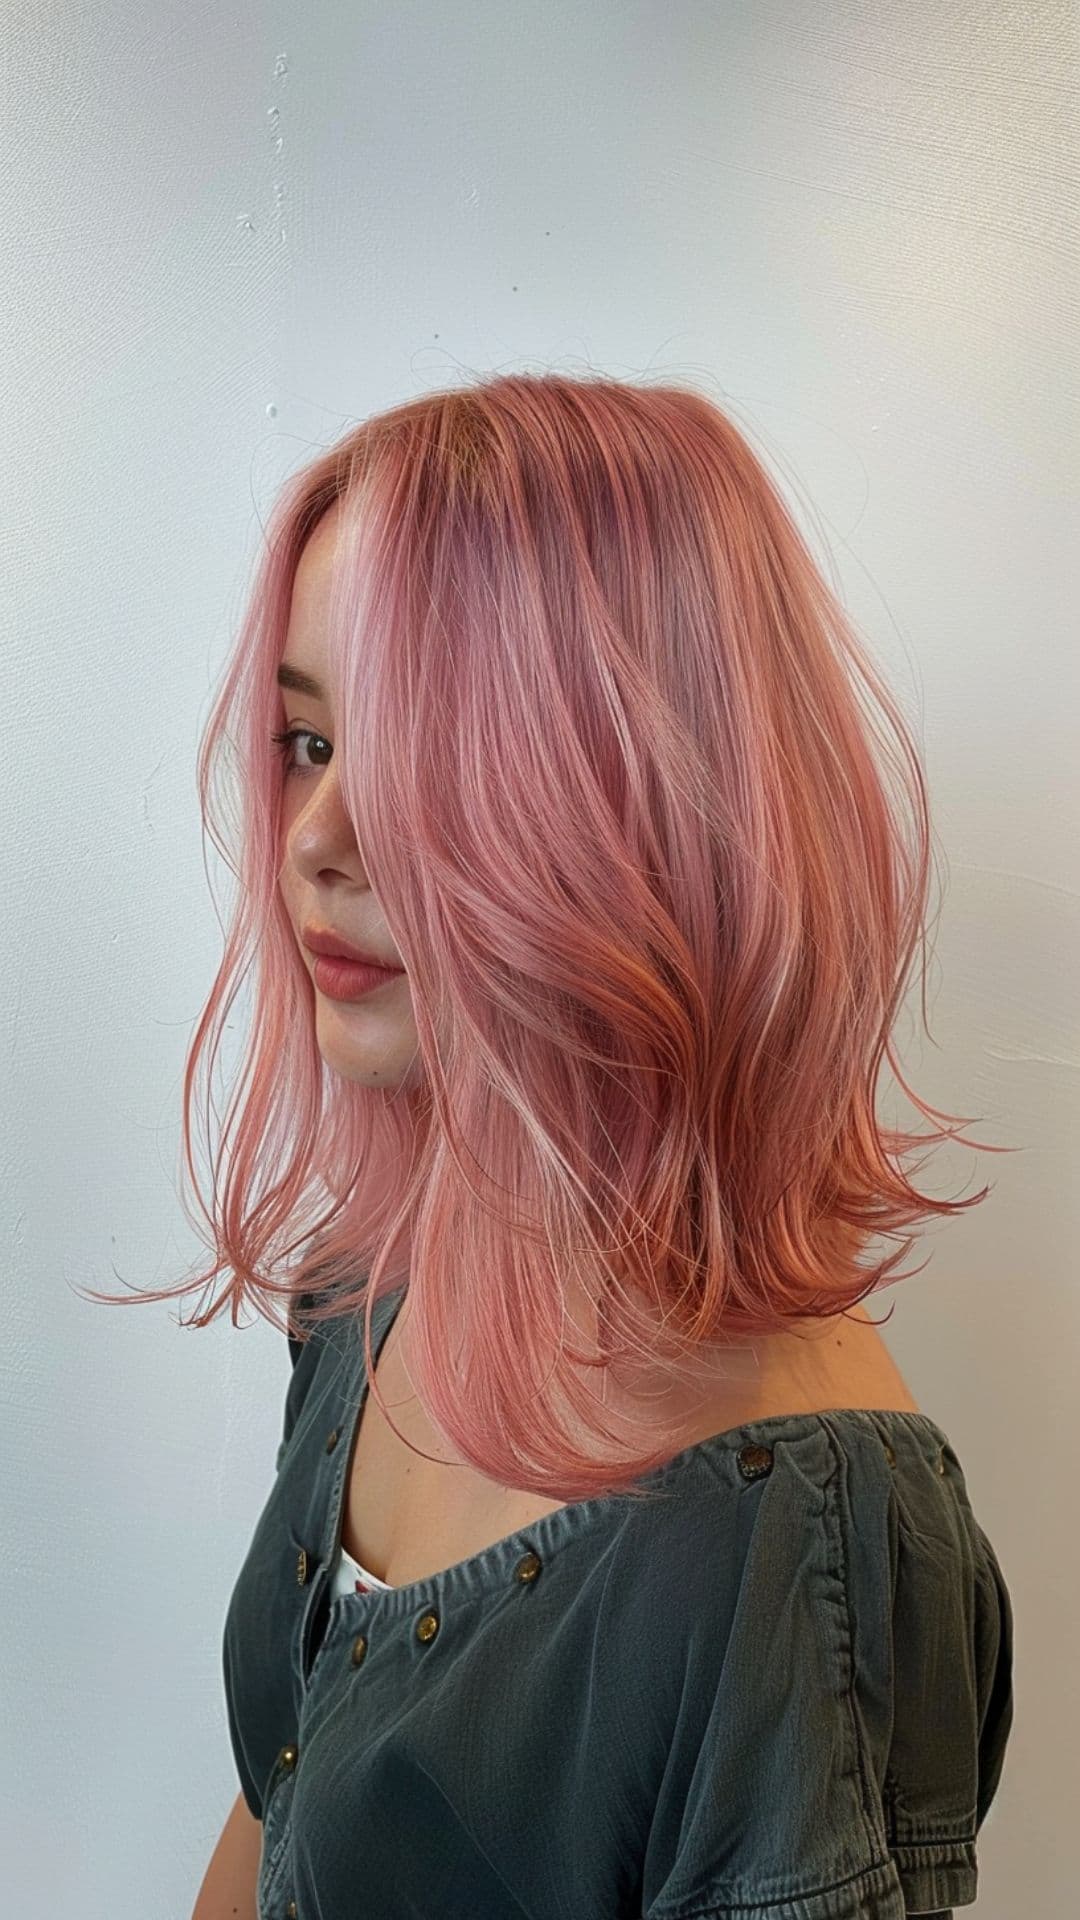 A woman modelling a rose pink hair.